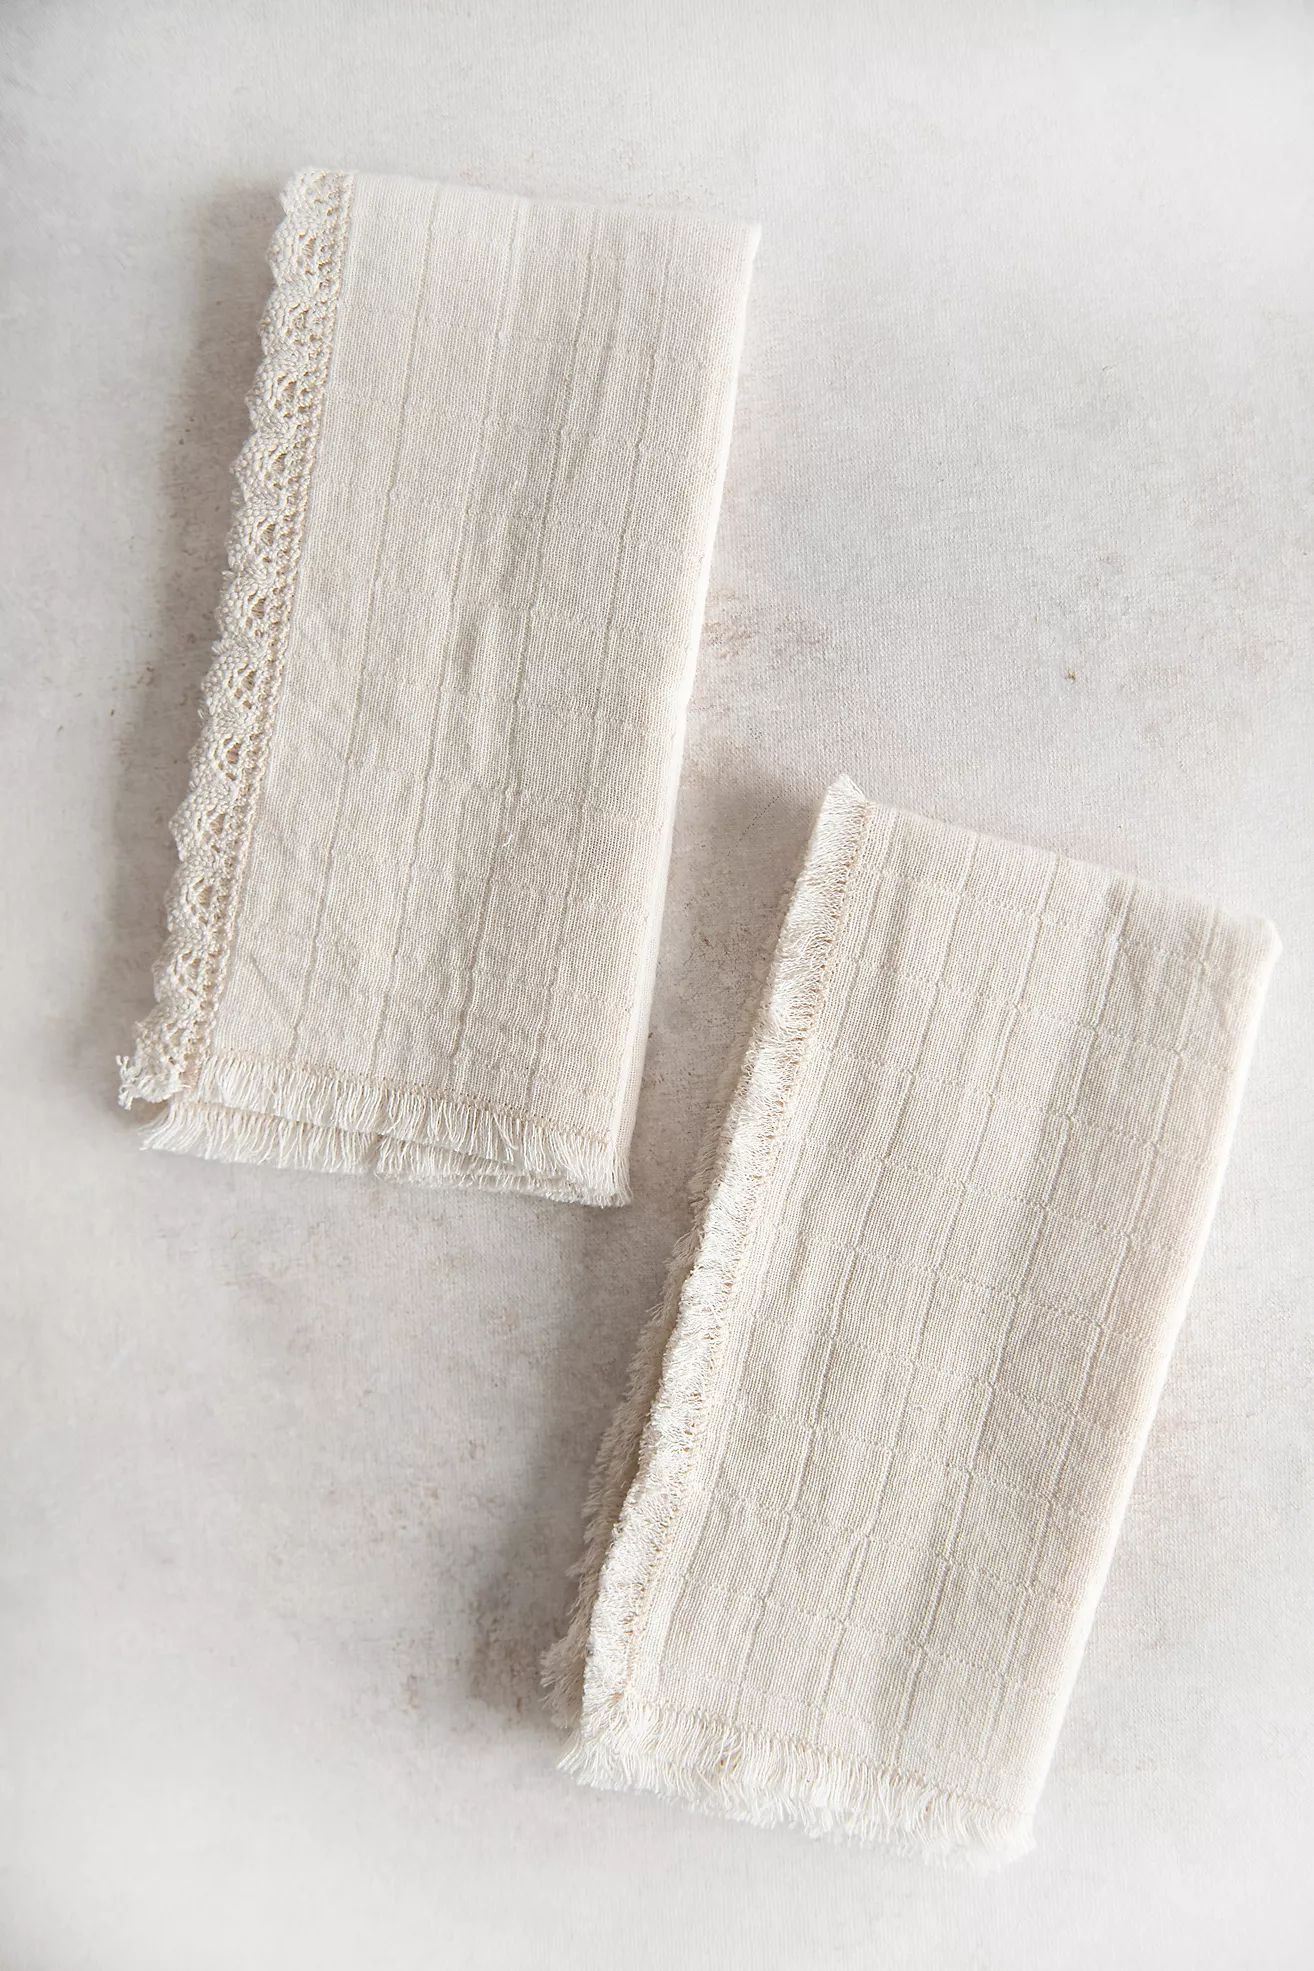 Connected Goods Pointelle Lace Napkin Set | Anthropologie (US)